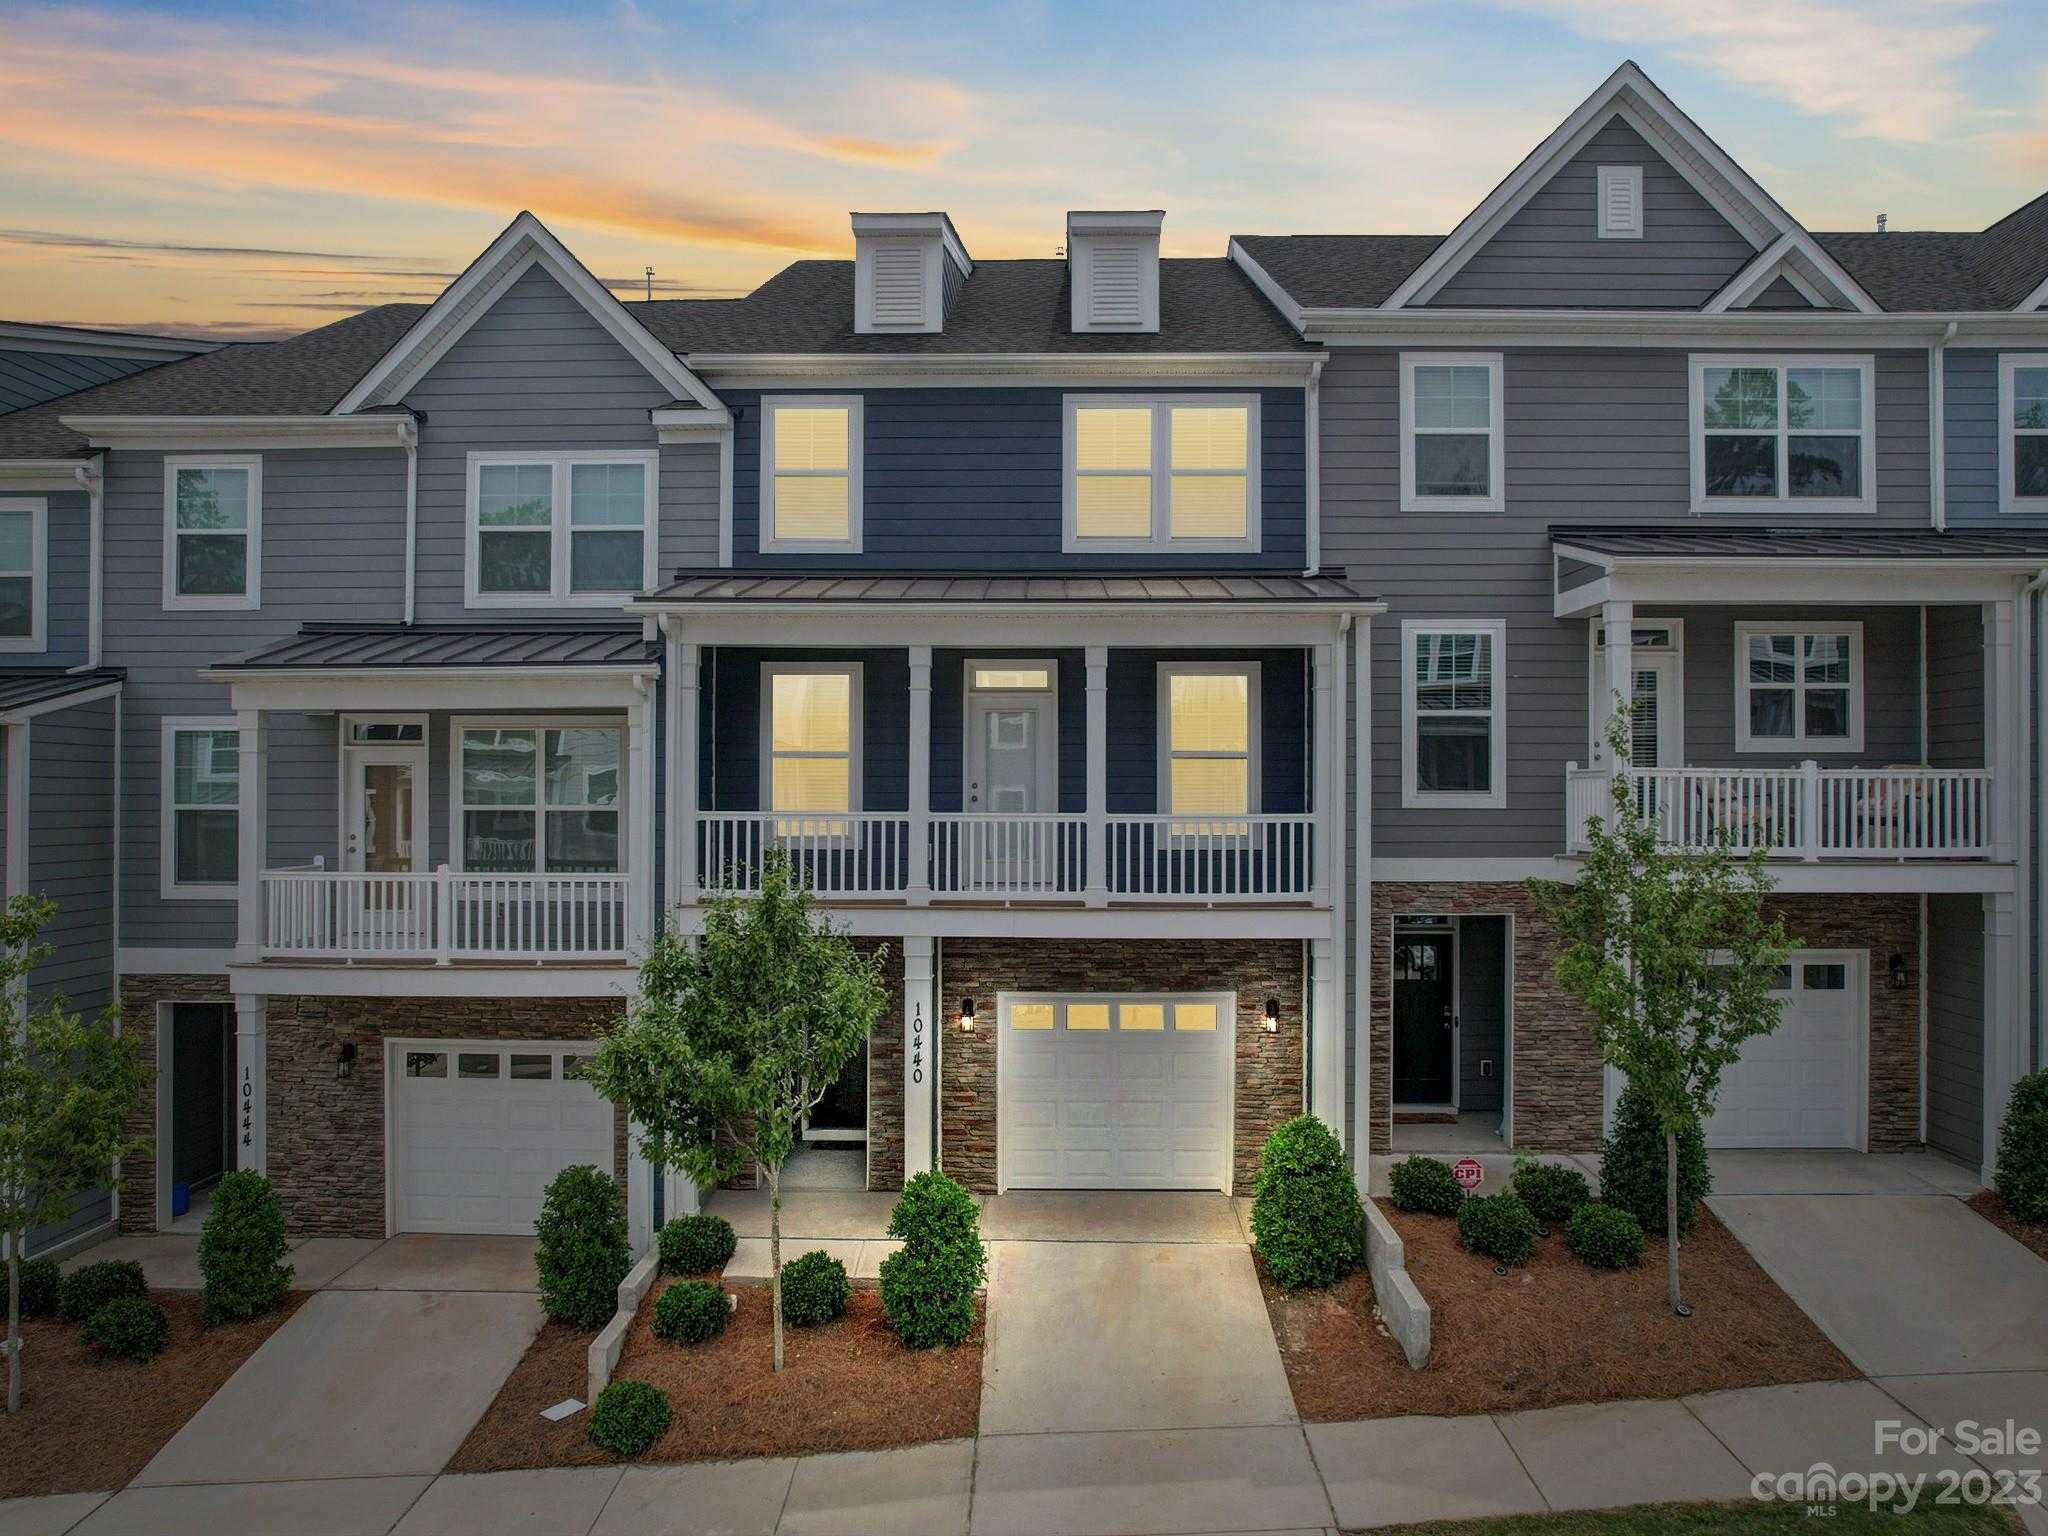 View Charlotte, NC 28262 townhome